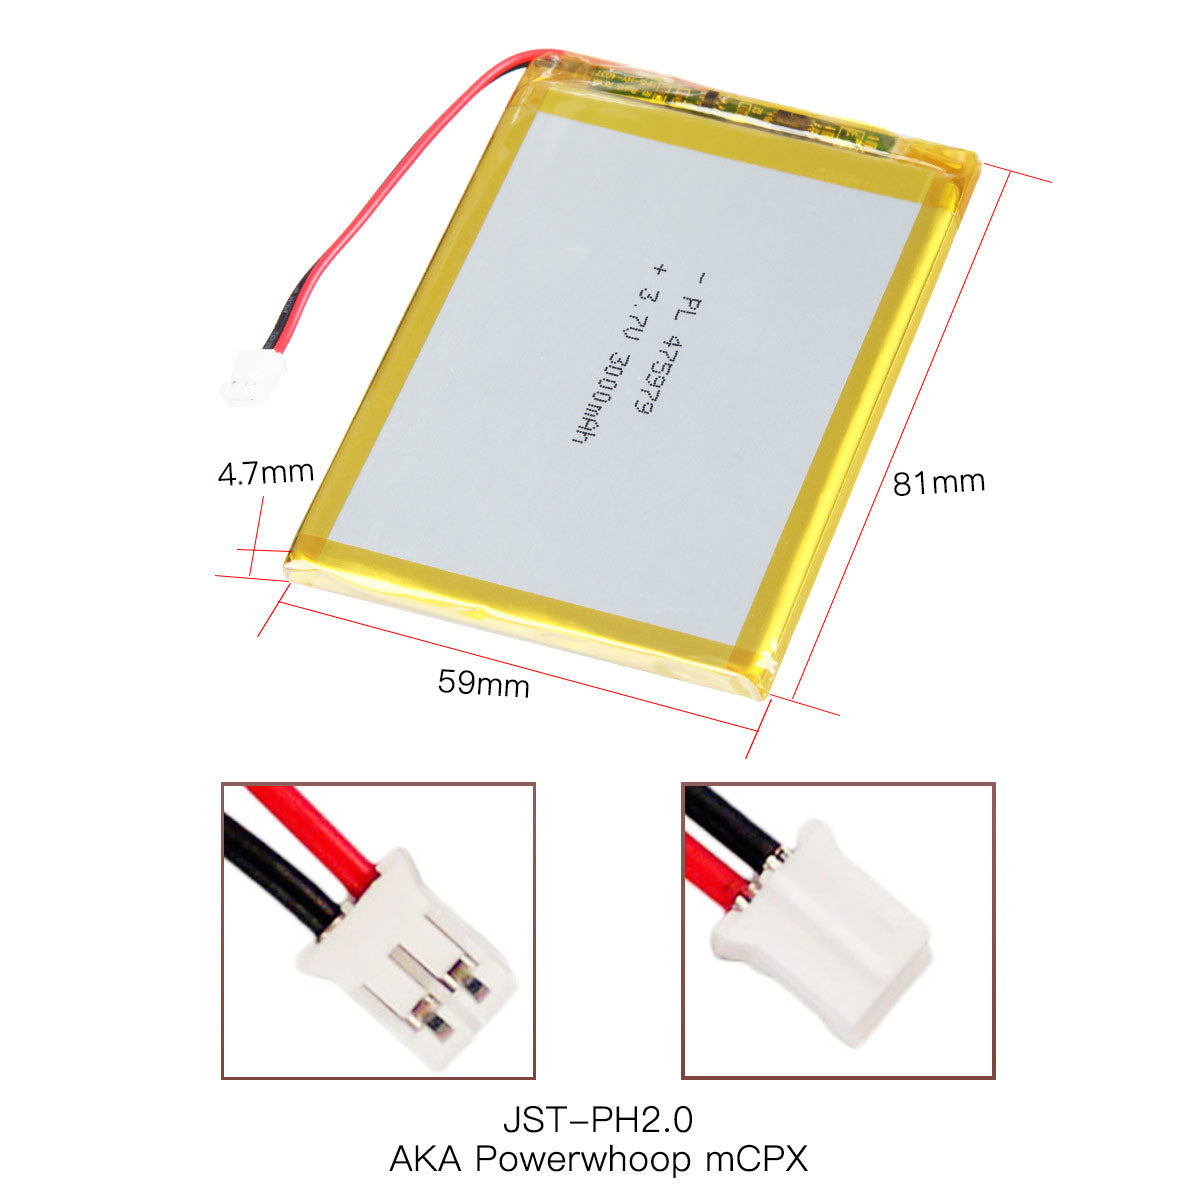 YDL 3.7V 3000mAh 475979 Rechargeable Lithium  Polymer Battery